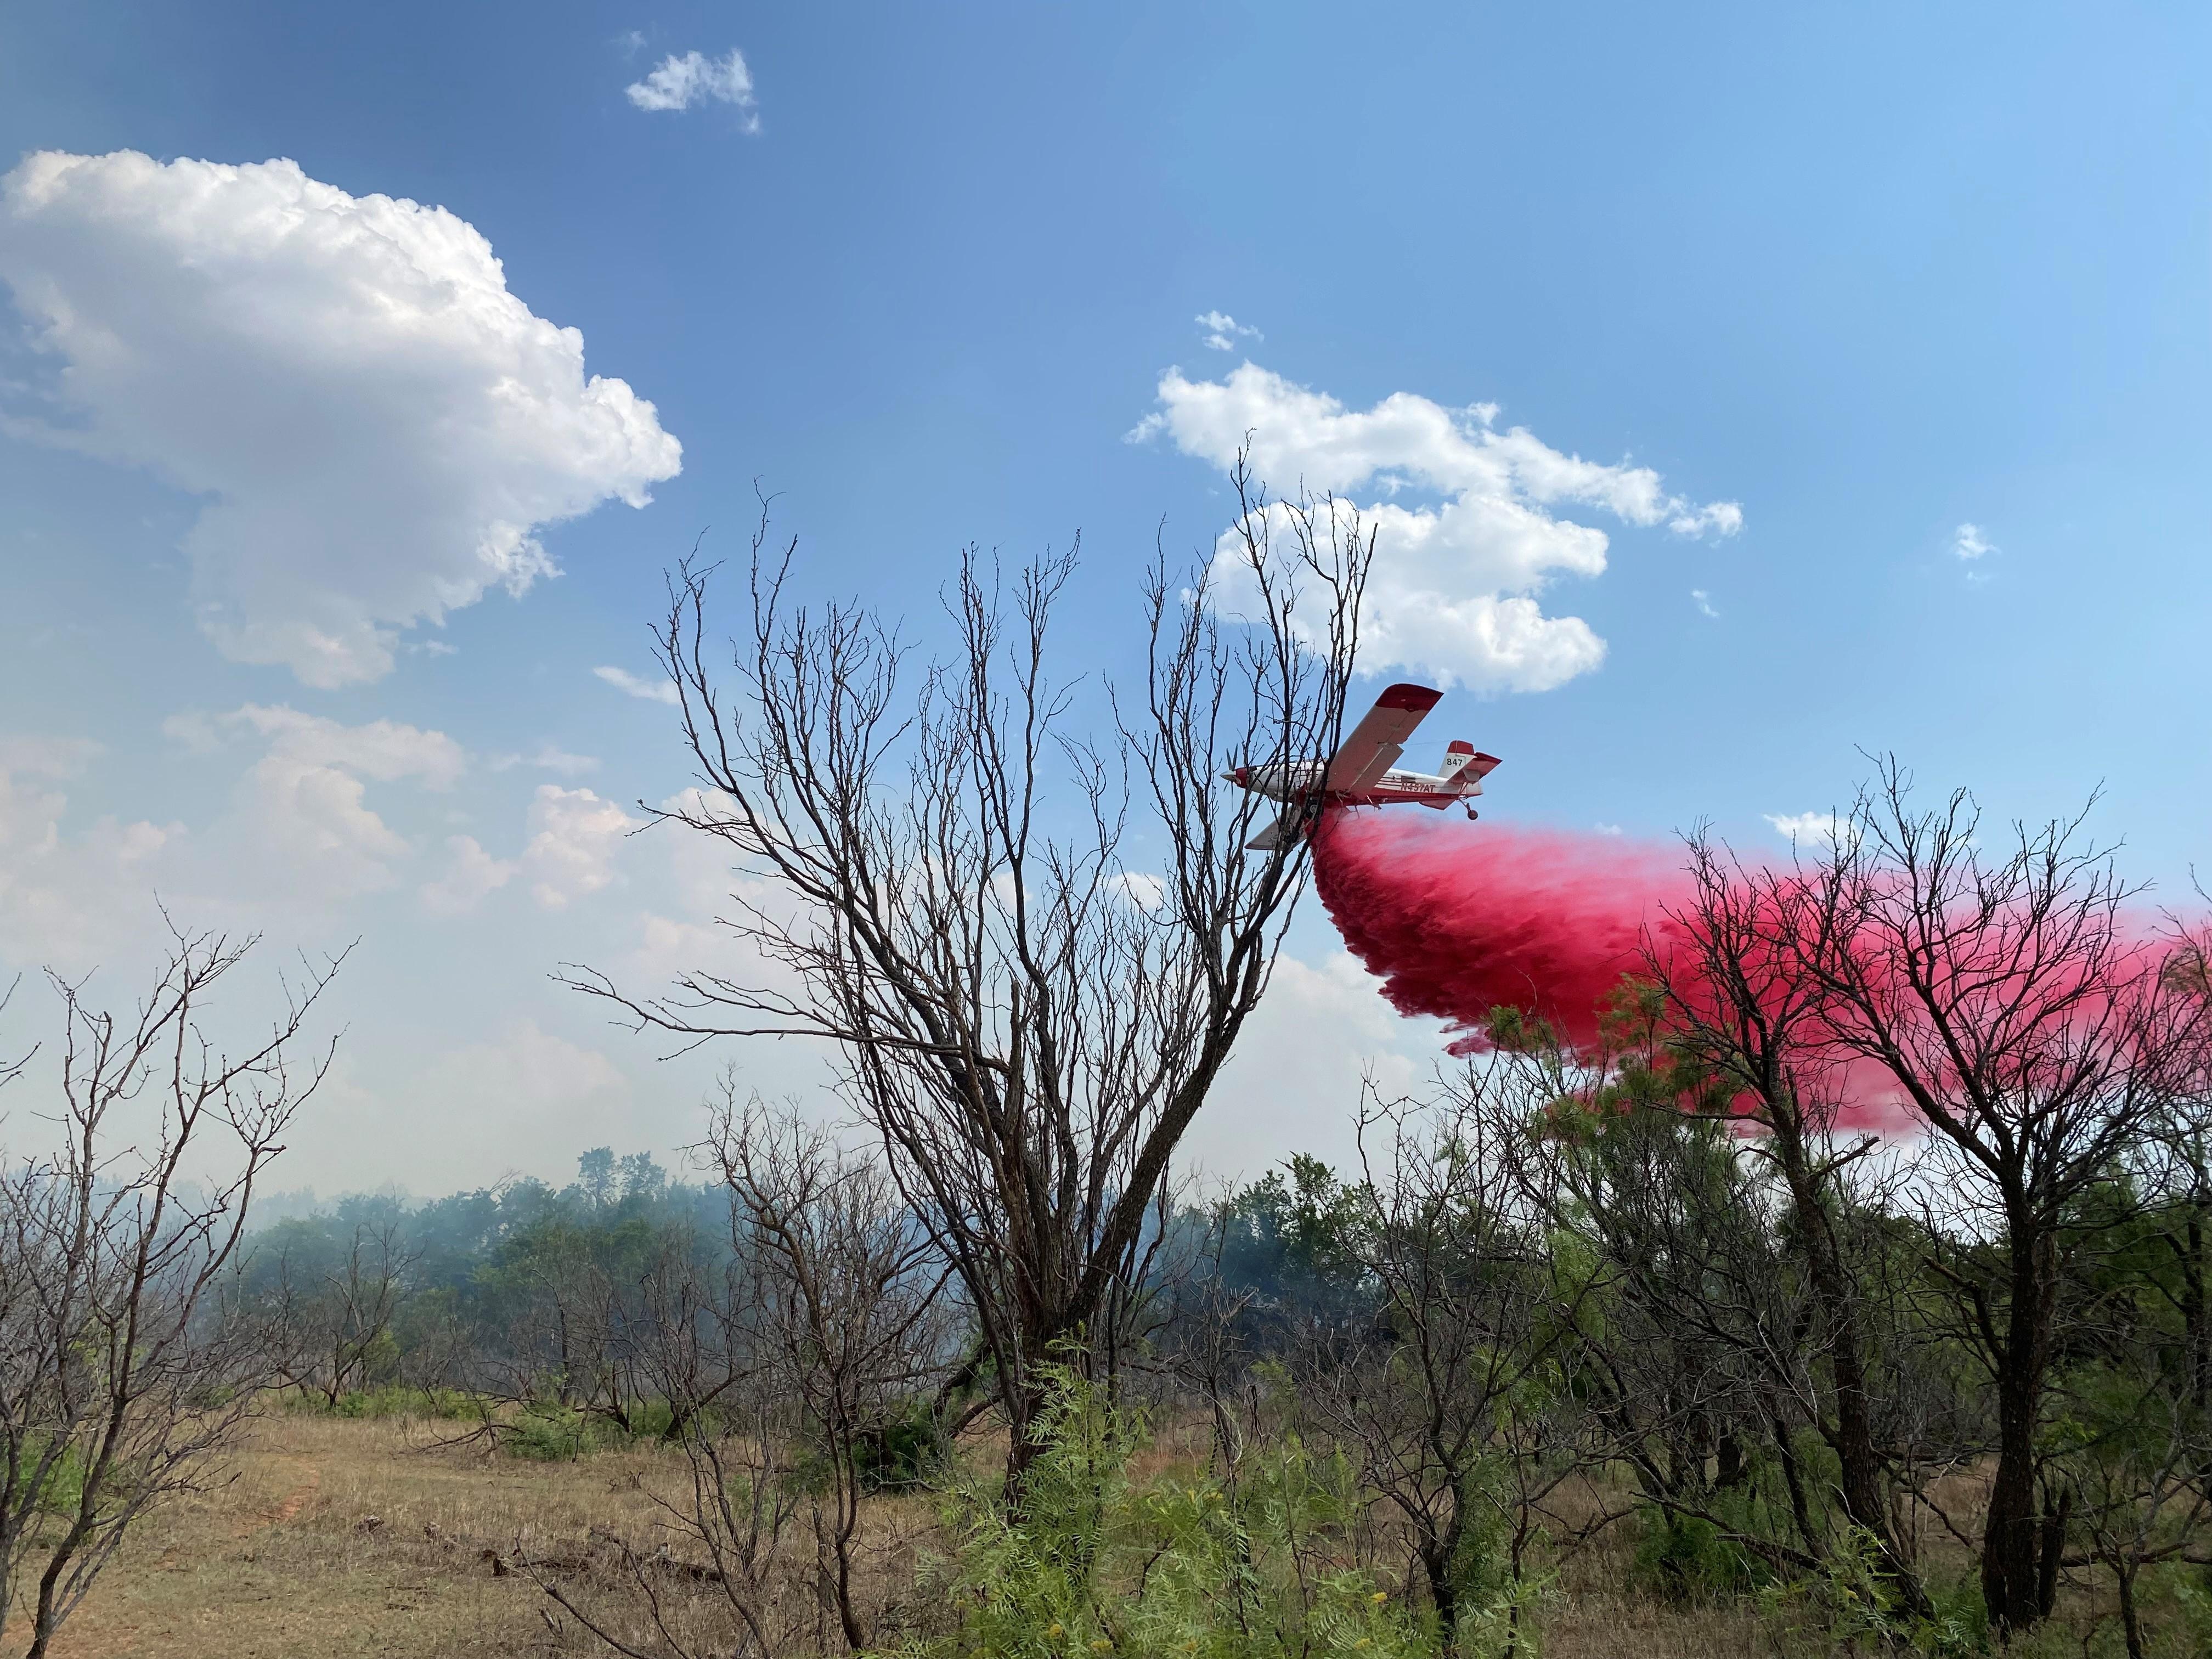 airplane is flying towards the left and there is pink liquid substance called retardant, on top of the active fire.